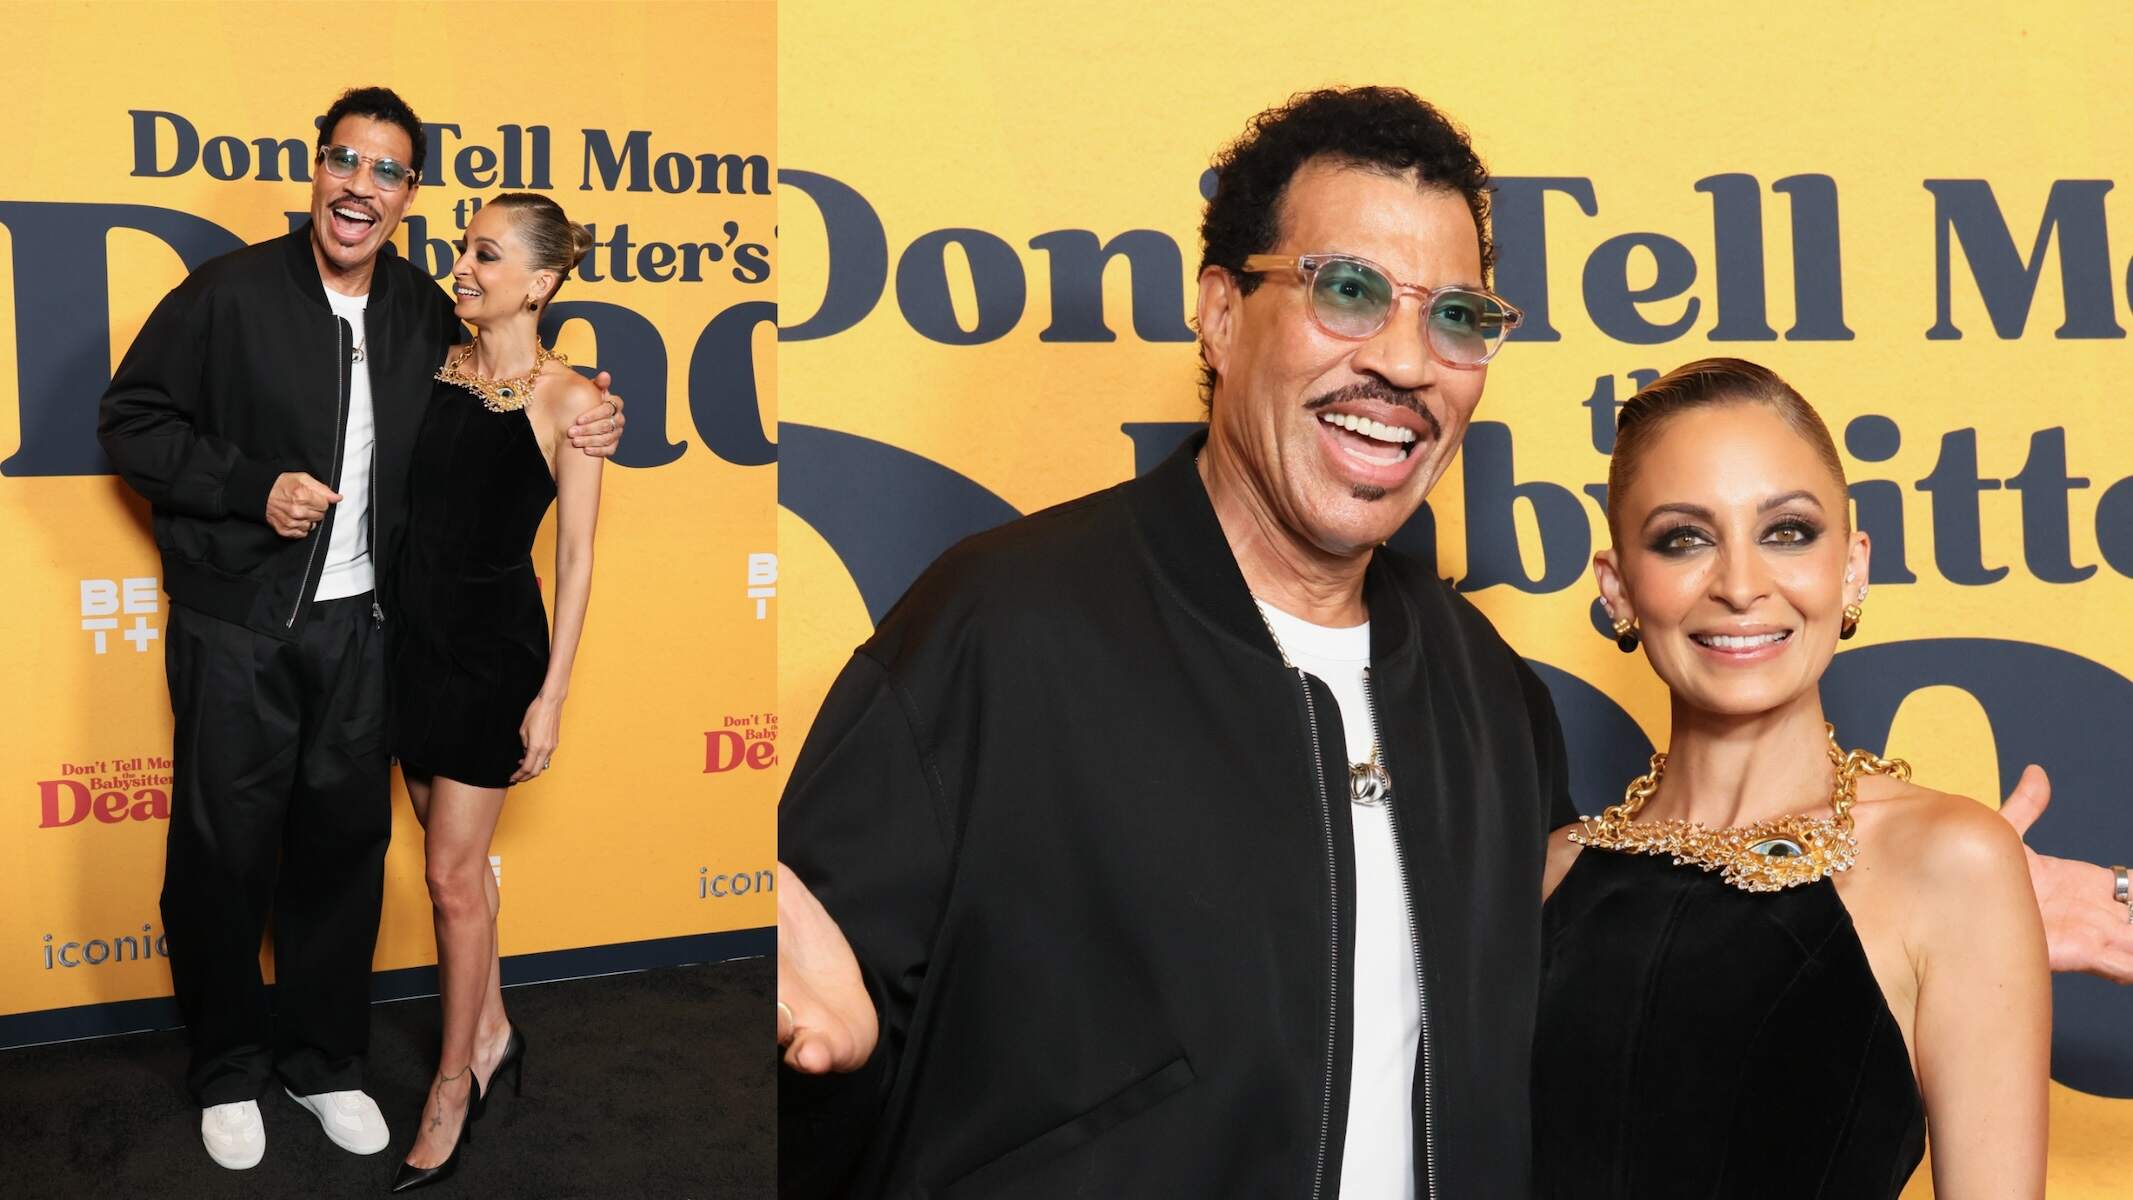 Nicole Richie and Lionel Richie laugh together on the red carpet at the 'Don't Tell Mom the Babysitter's Dead' premiere